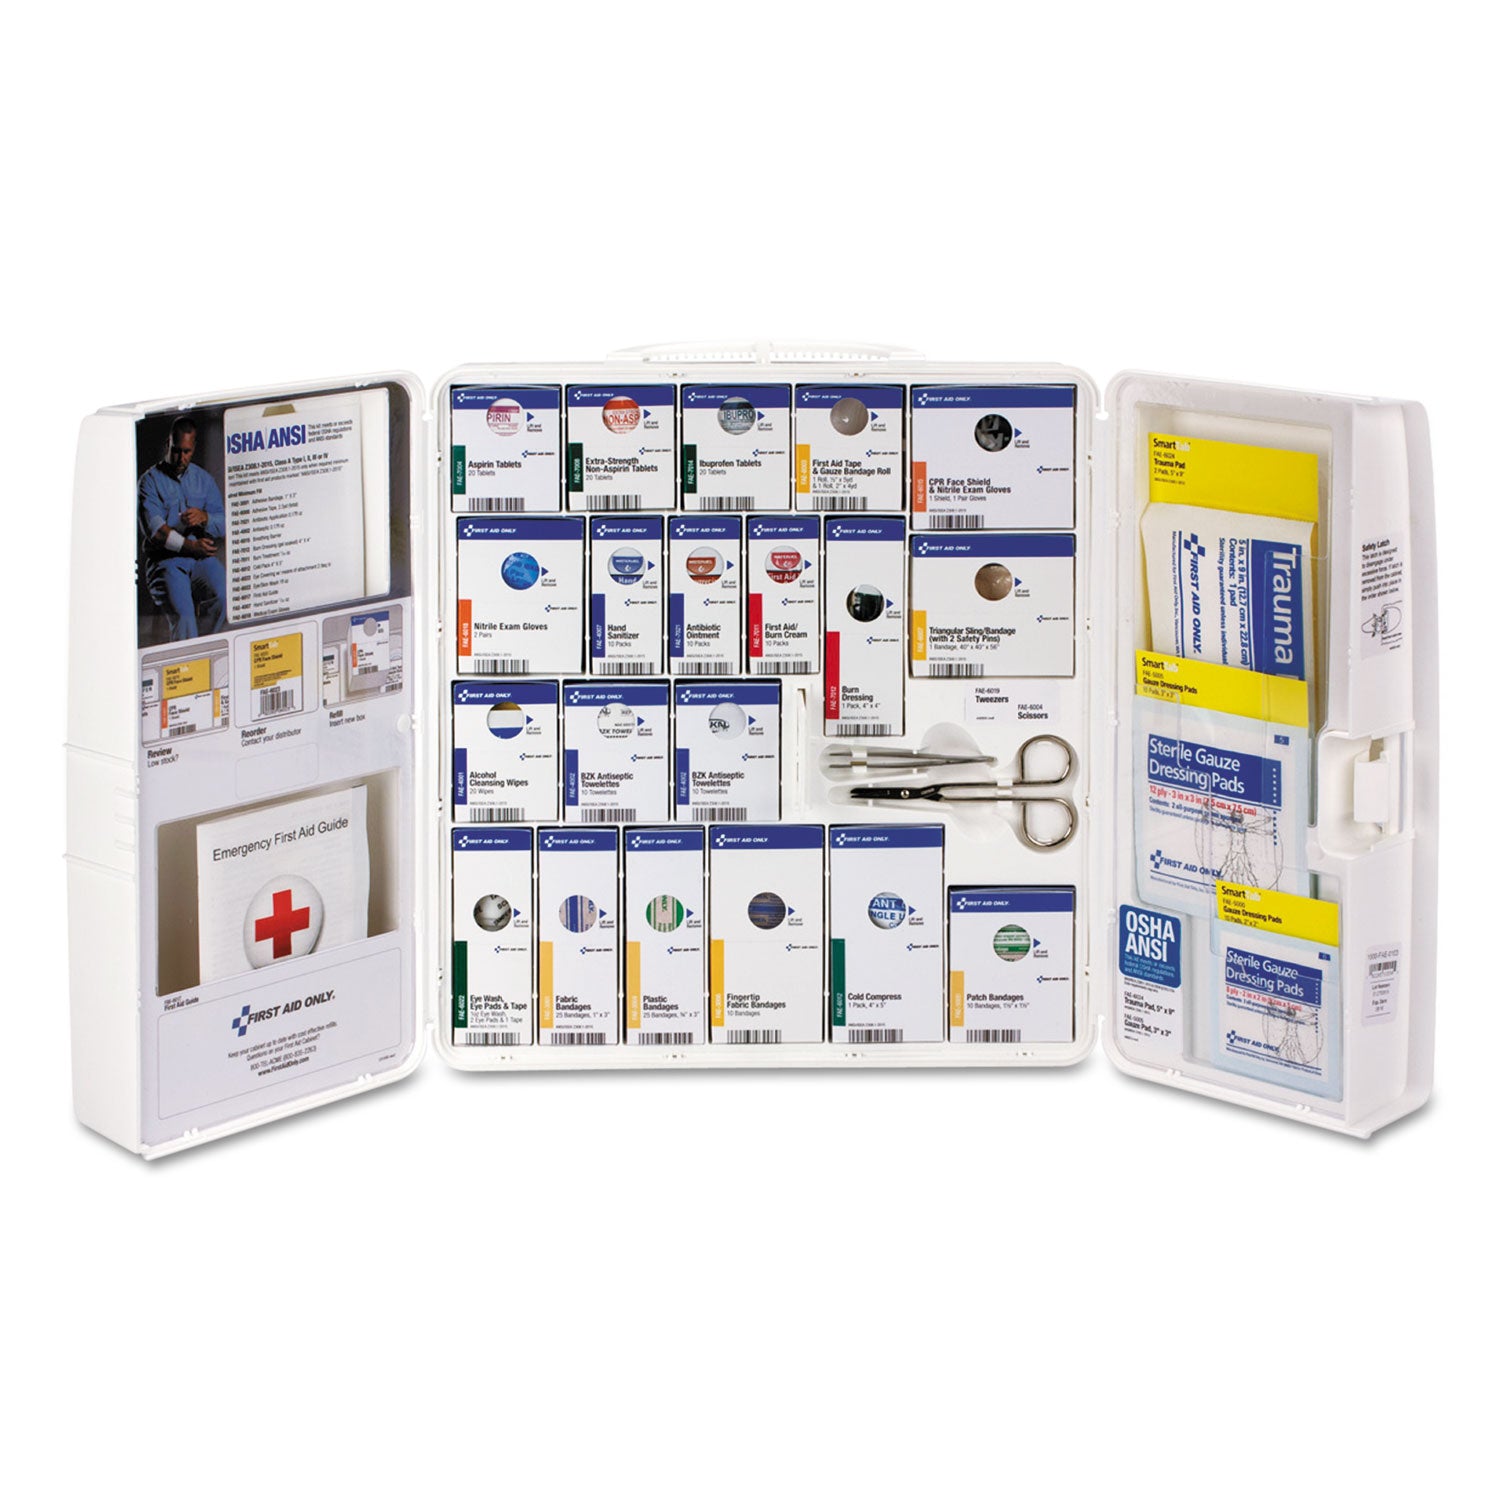 ansi-2015-smartcompliance-general-business-first-aid-station-class-a+-50-people-241-pieces_fao90608021 - 2